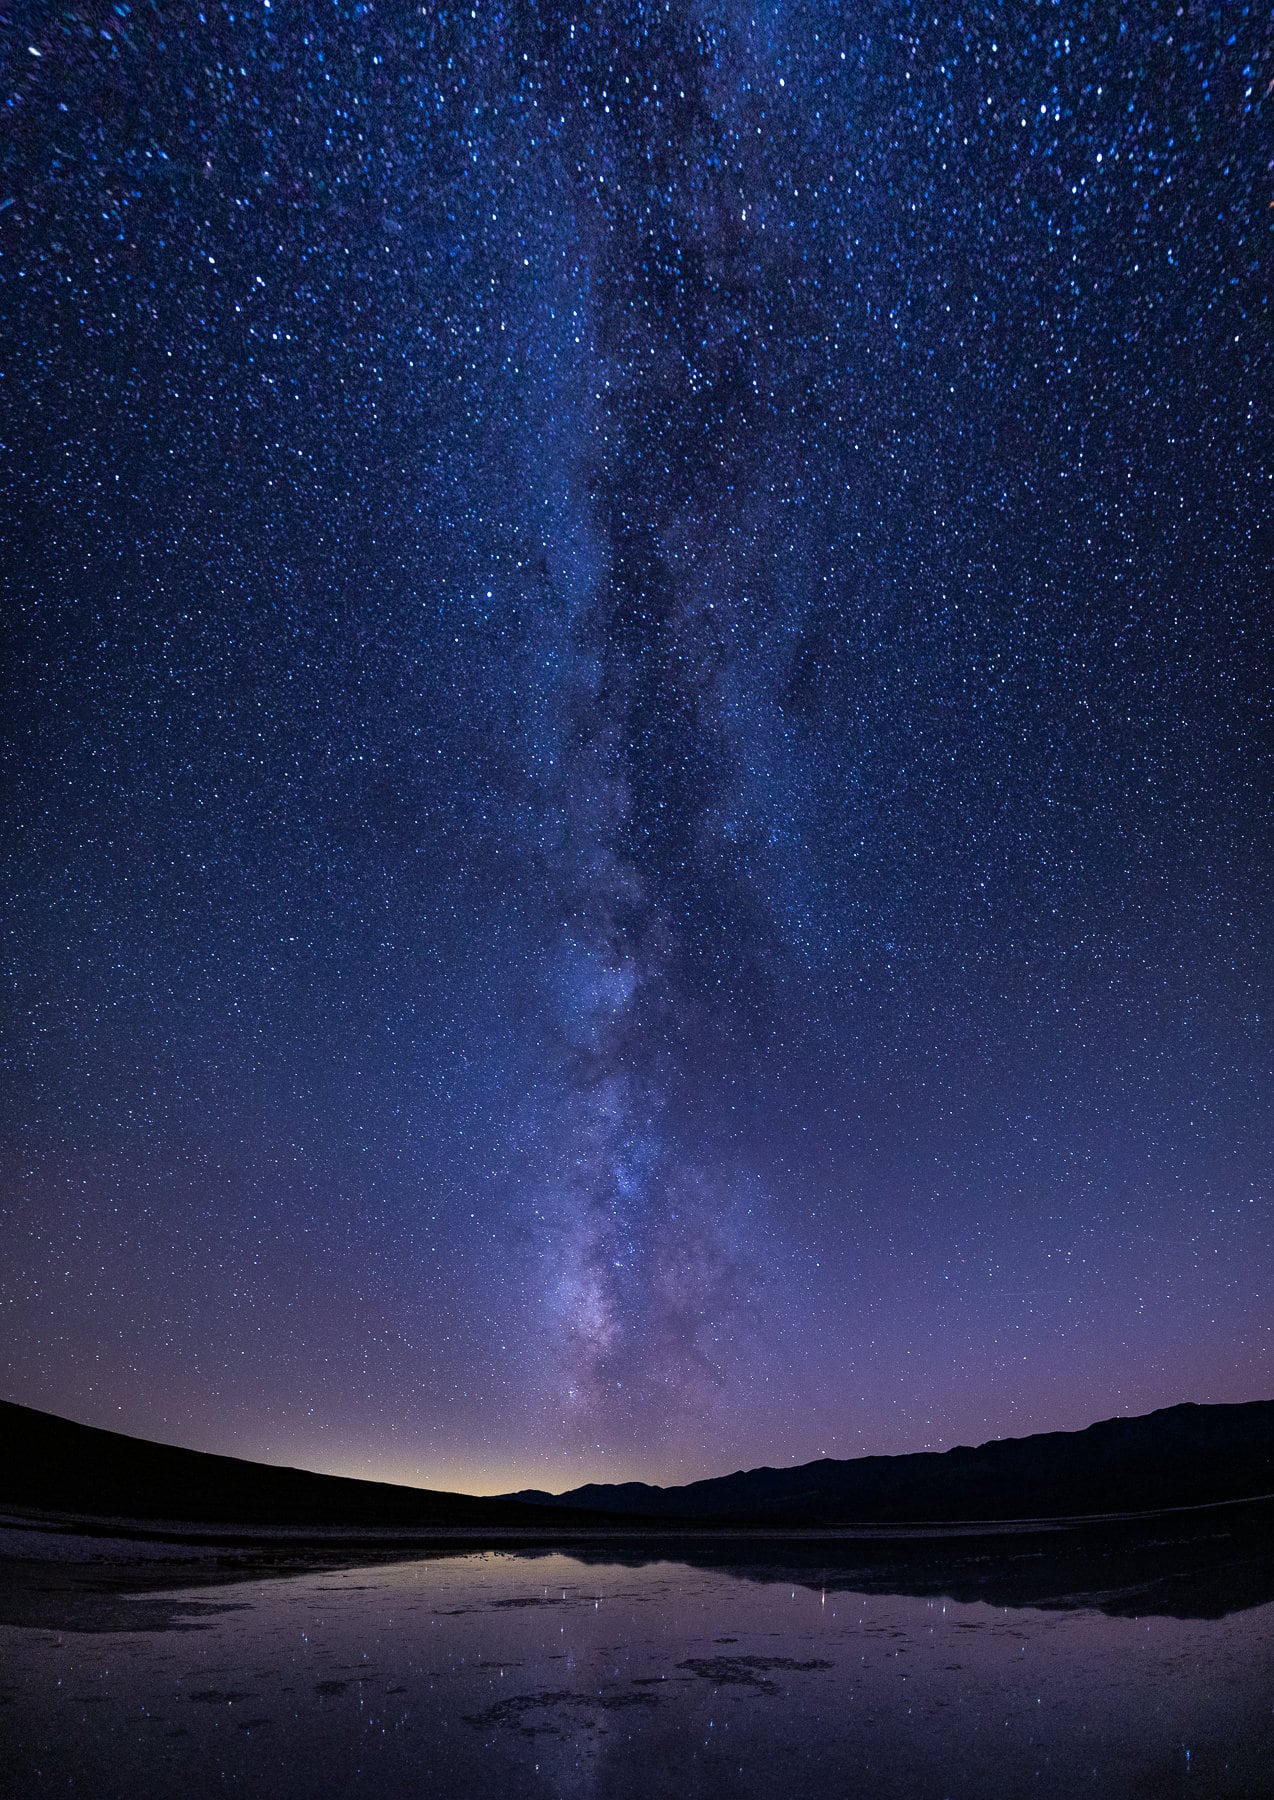 Death Valley's badwater Basin reflects the milky way against a purple sky in this astrophotography photograph.